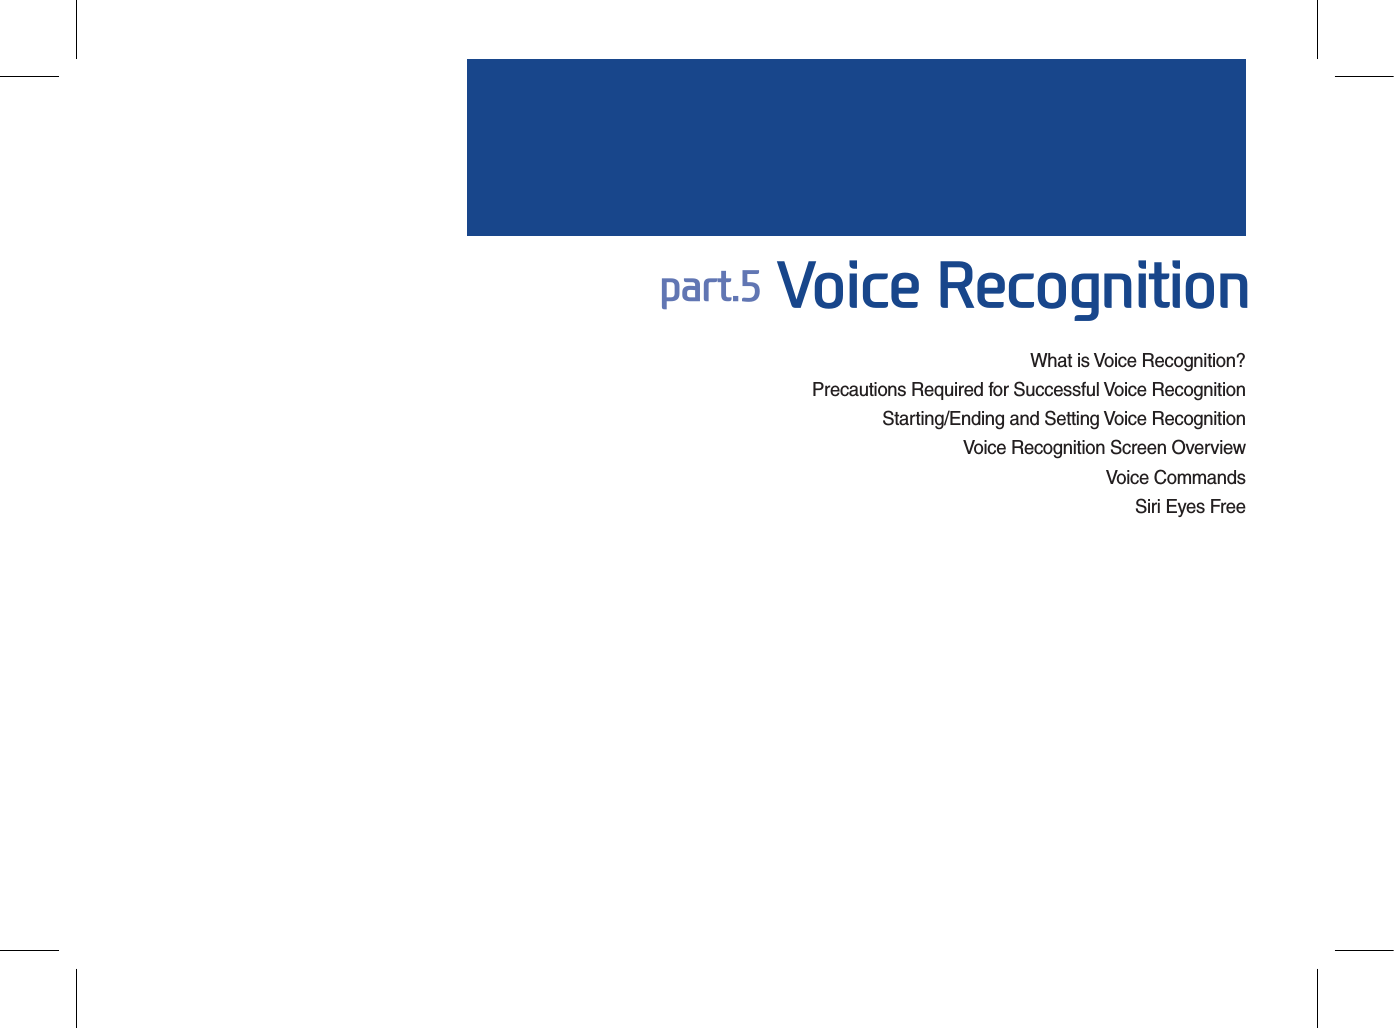 What is Voice Recognition?Precautions Required for Successful Voice RecognitionStarting/Ending and Setting Voice RecognitionVoice Recognition Screen OverviewVoice CommandsSiri Eyes Free part.5 Voice Recognition